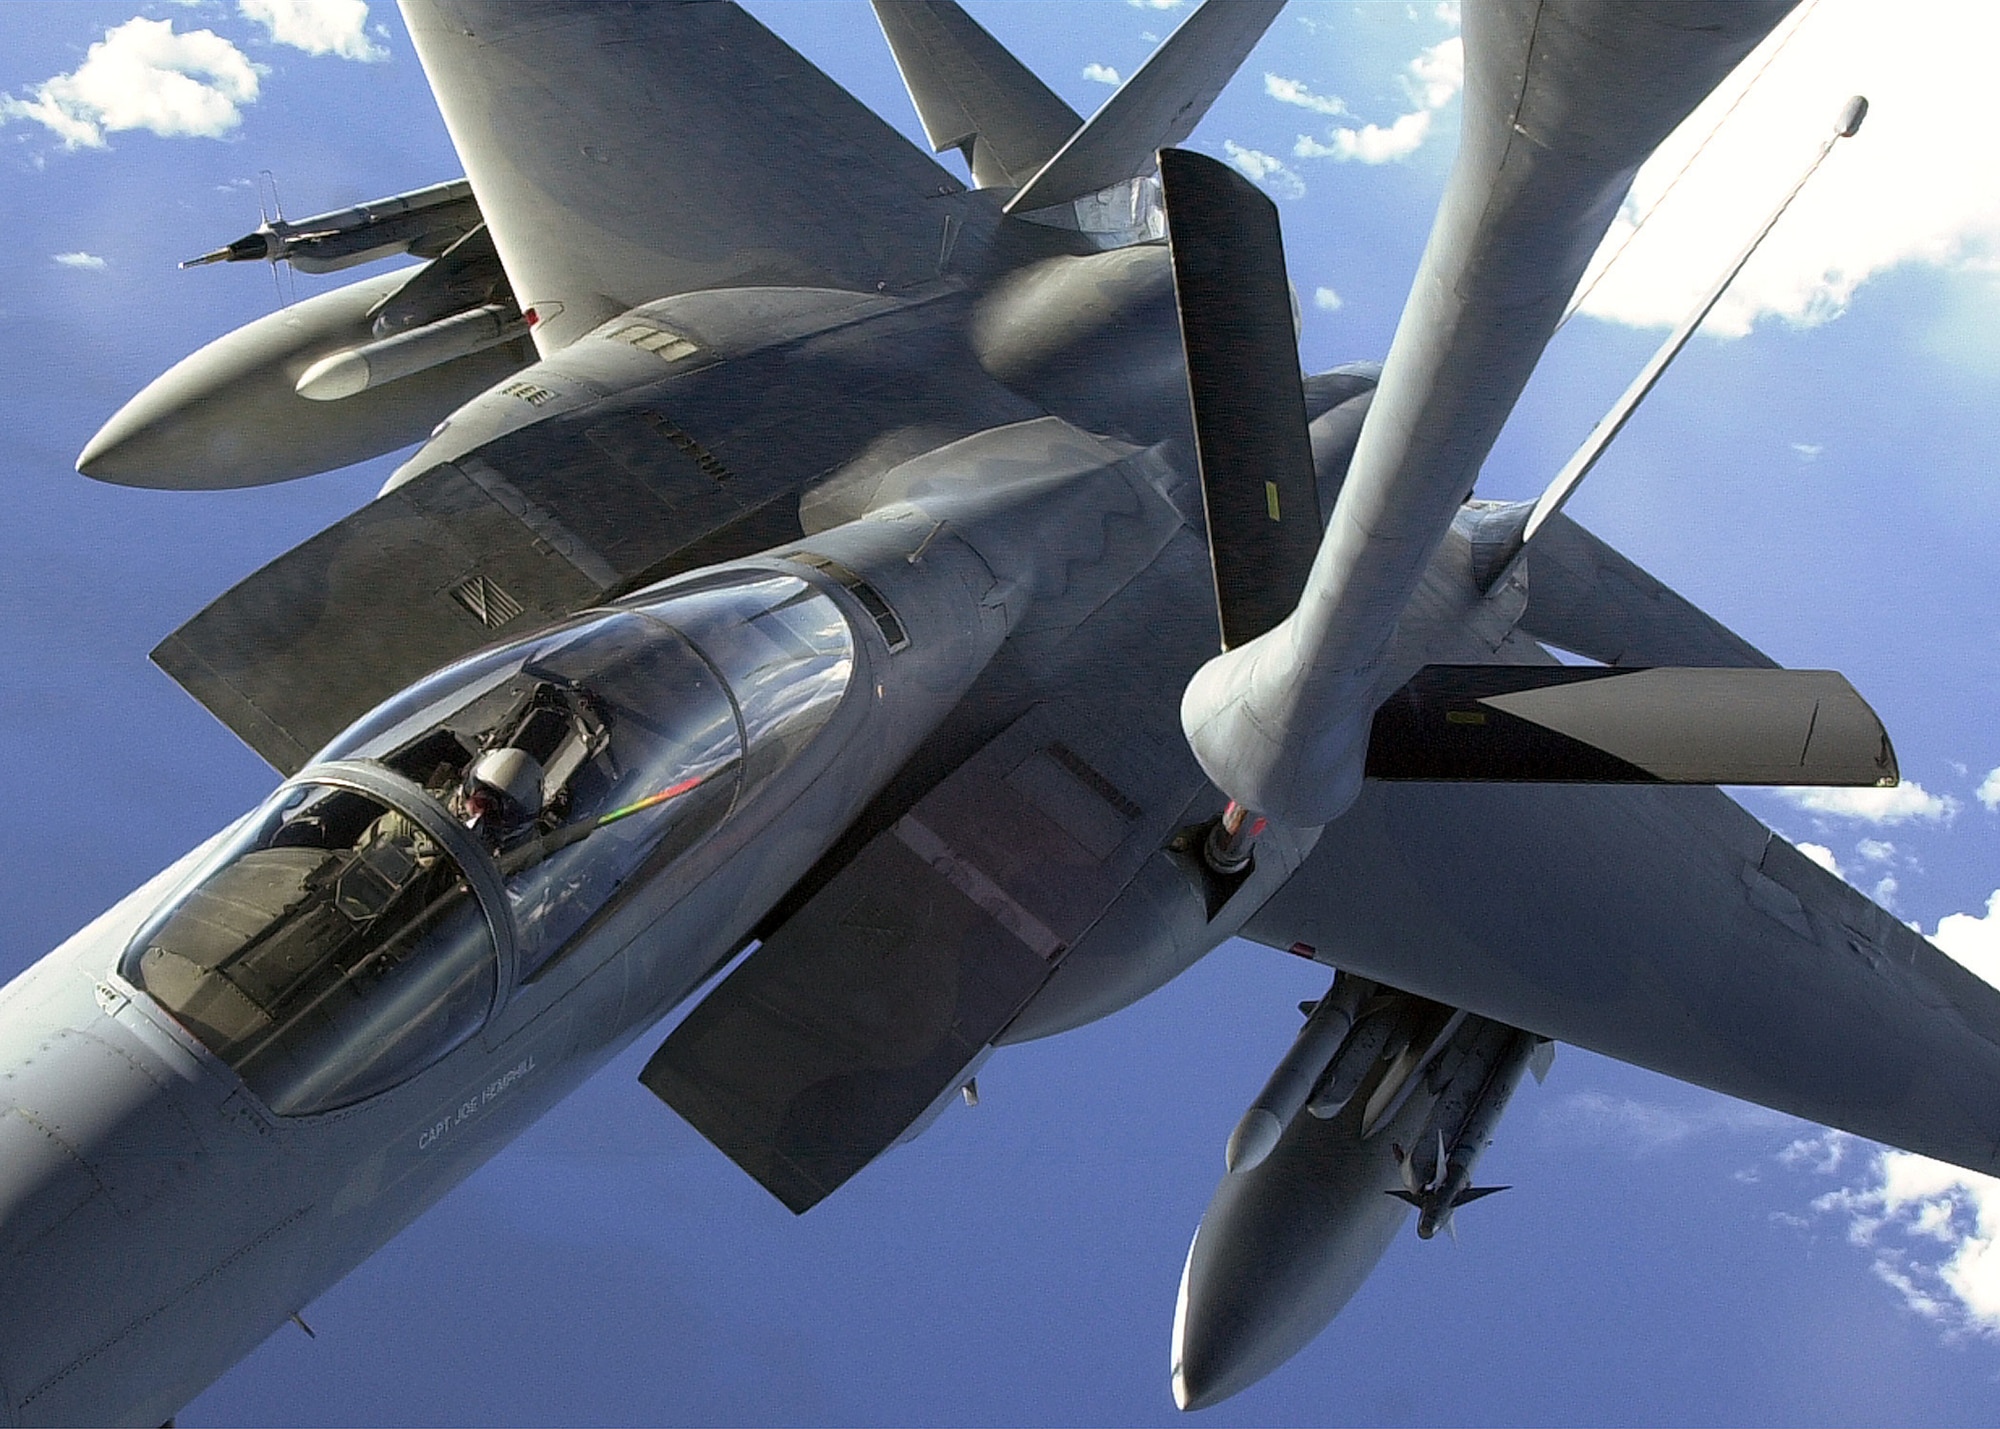 OVER THE PACIFIC OCEAN -- An F-15C from the 67th Fighter Squadron refuels in flight from a KC-135R, from the 909th Air Refueling Squadron, June 28, 2001, while on a routine training mission over the Pacific ocean.  Both units are stationed at Kadena Air Base, Japan.  (U.S. Air Force photo by Master Sgt. Marvice Krause)